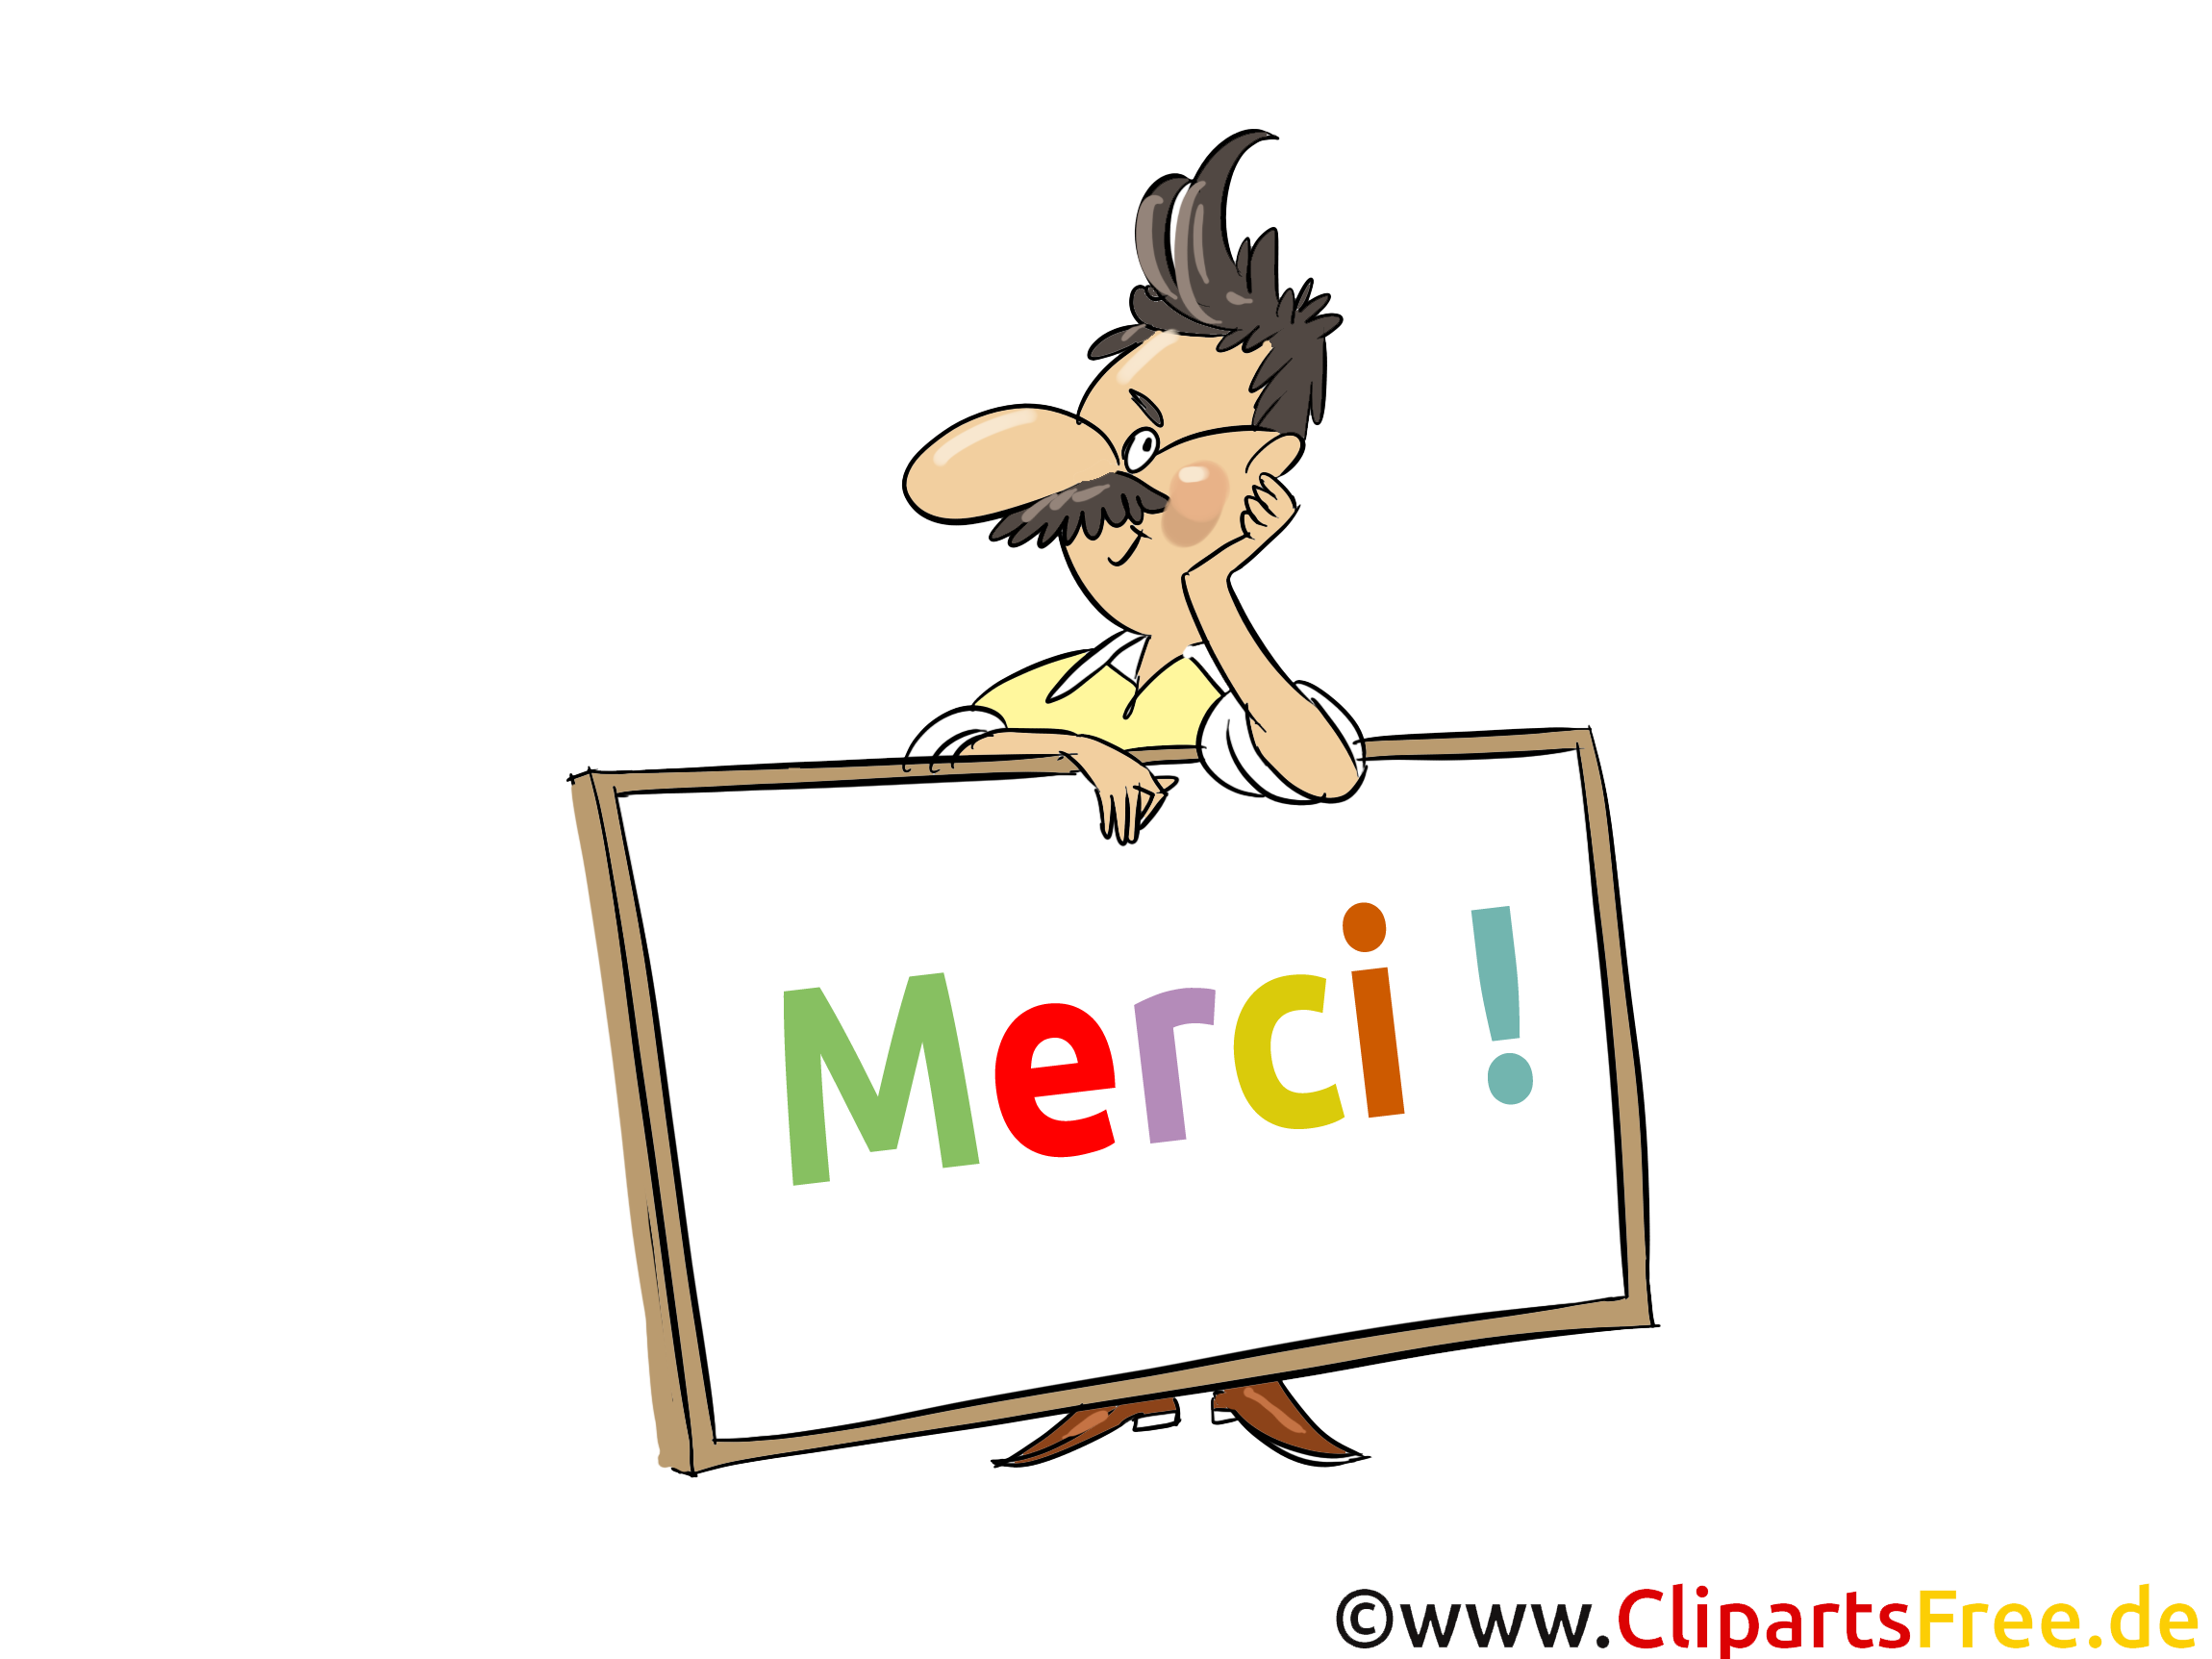 Homme mage - Merci images cliparts